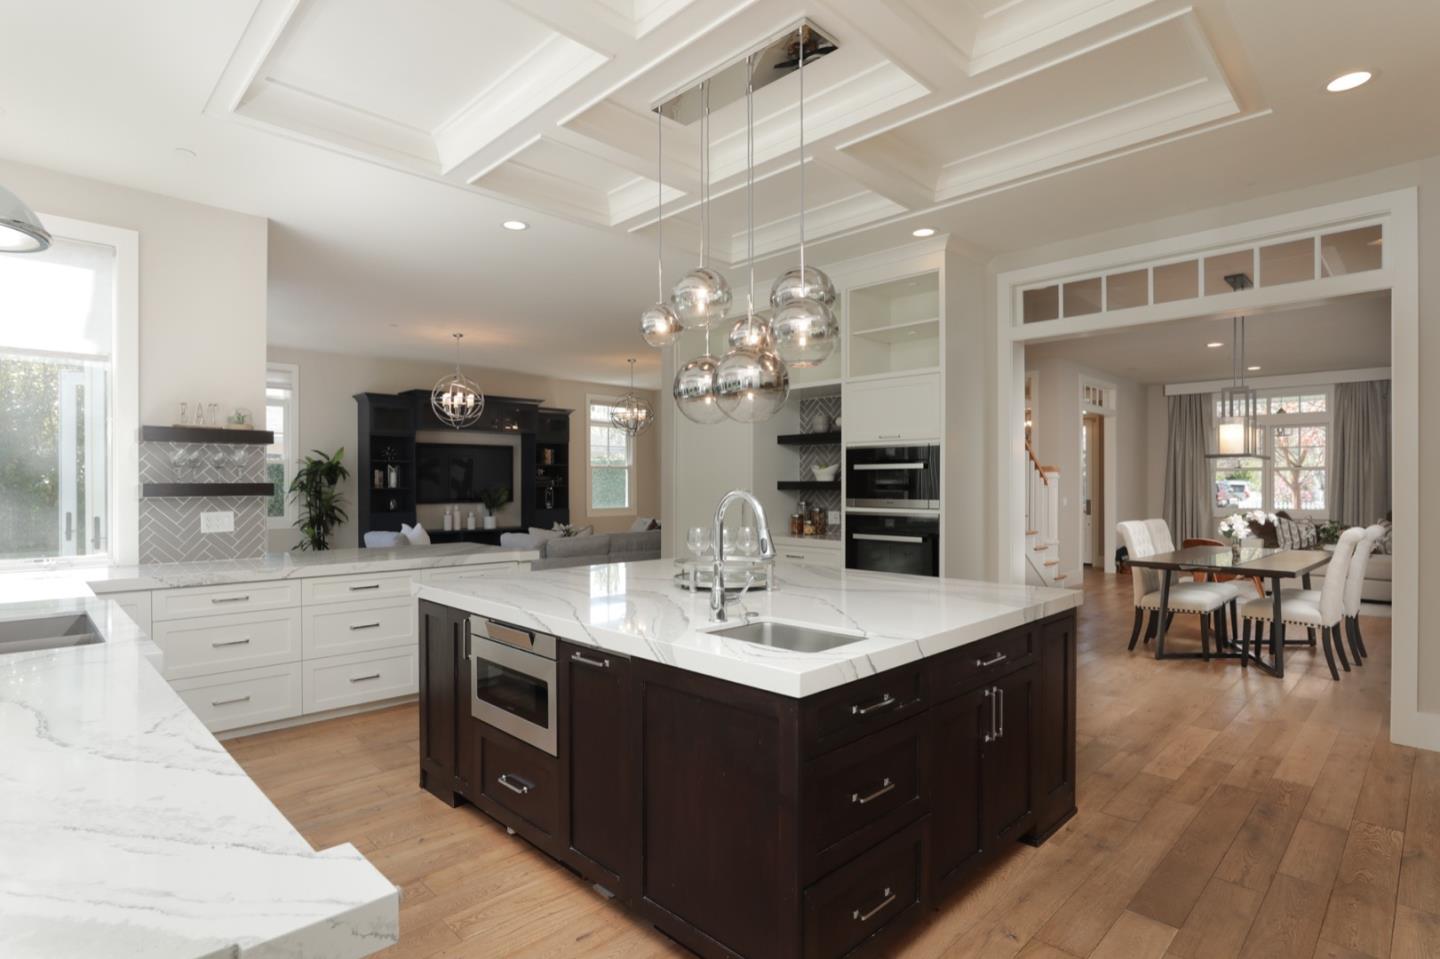 Luxury kitchen with white cabinets